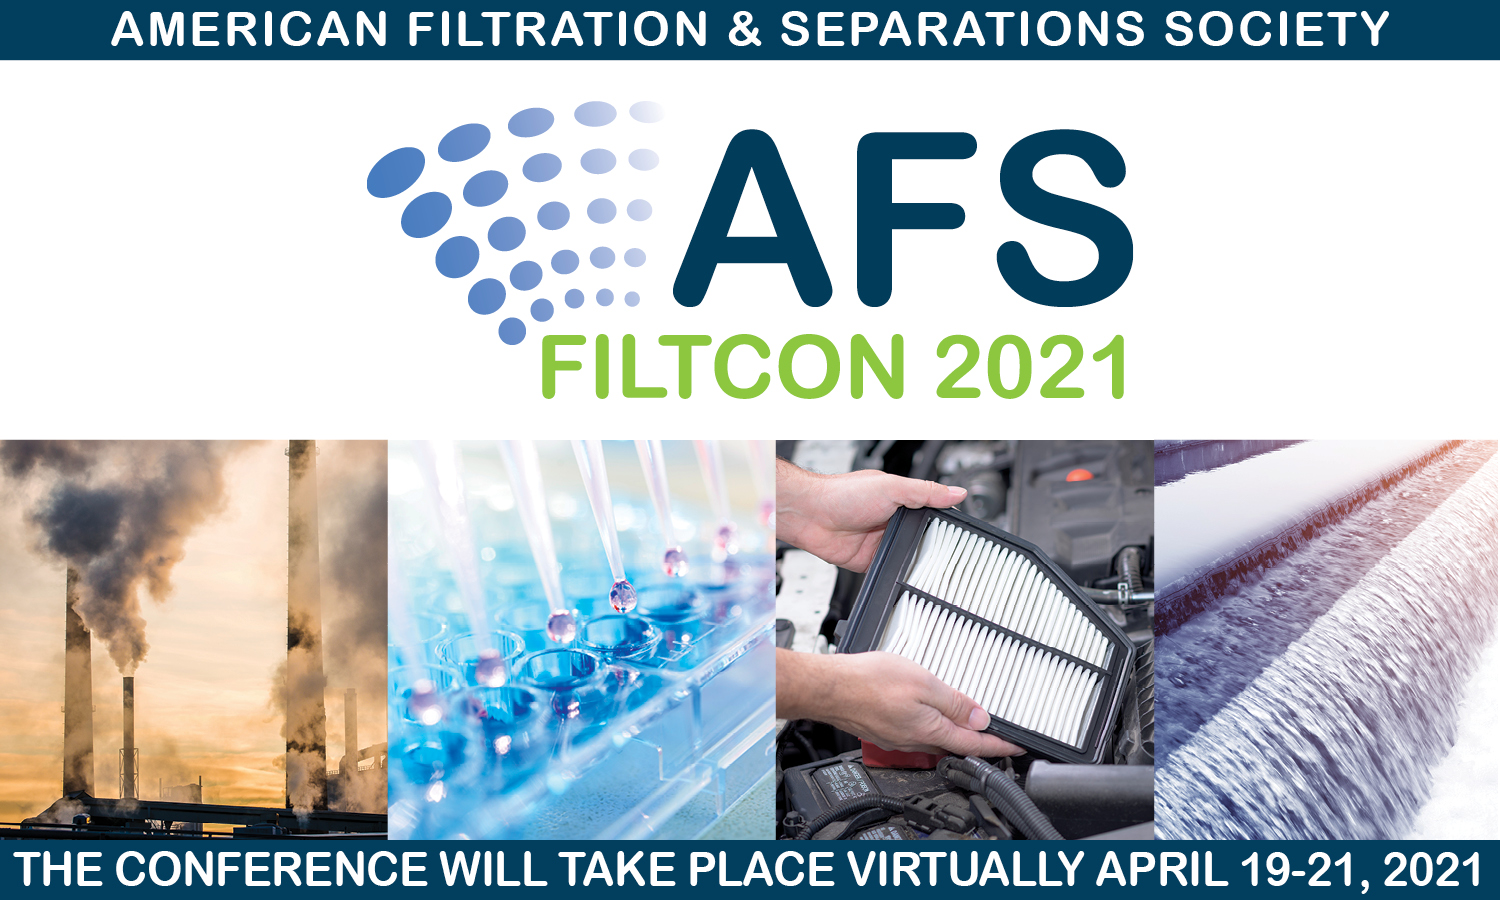 The AFS FiltCon 2021 abstract submissions process is open with a deadline of 1 March.